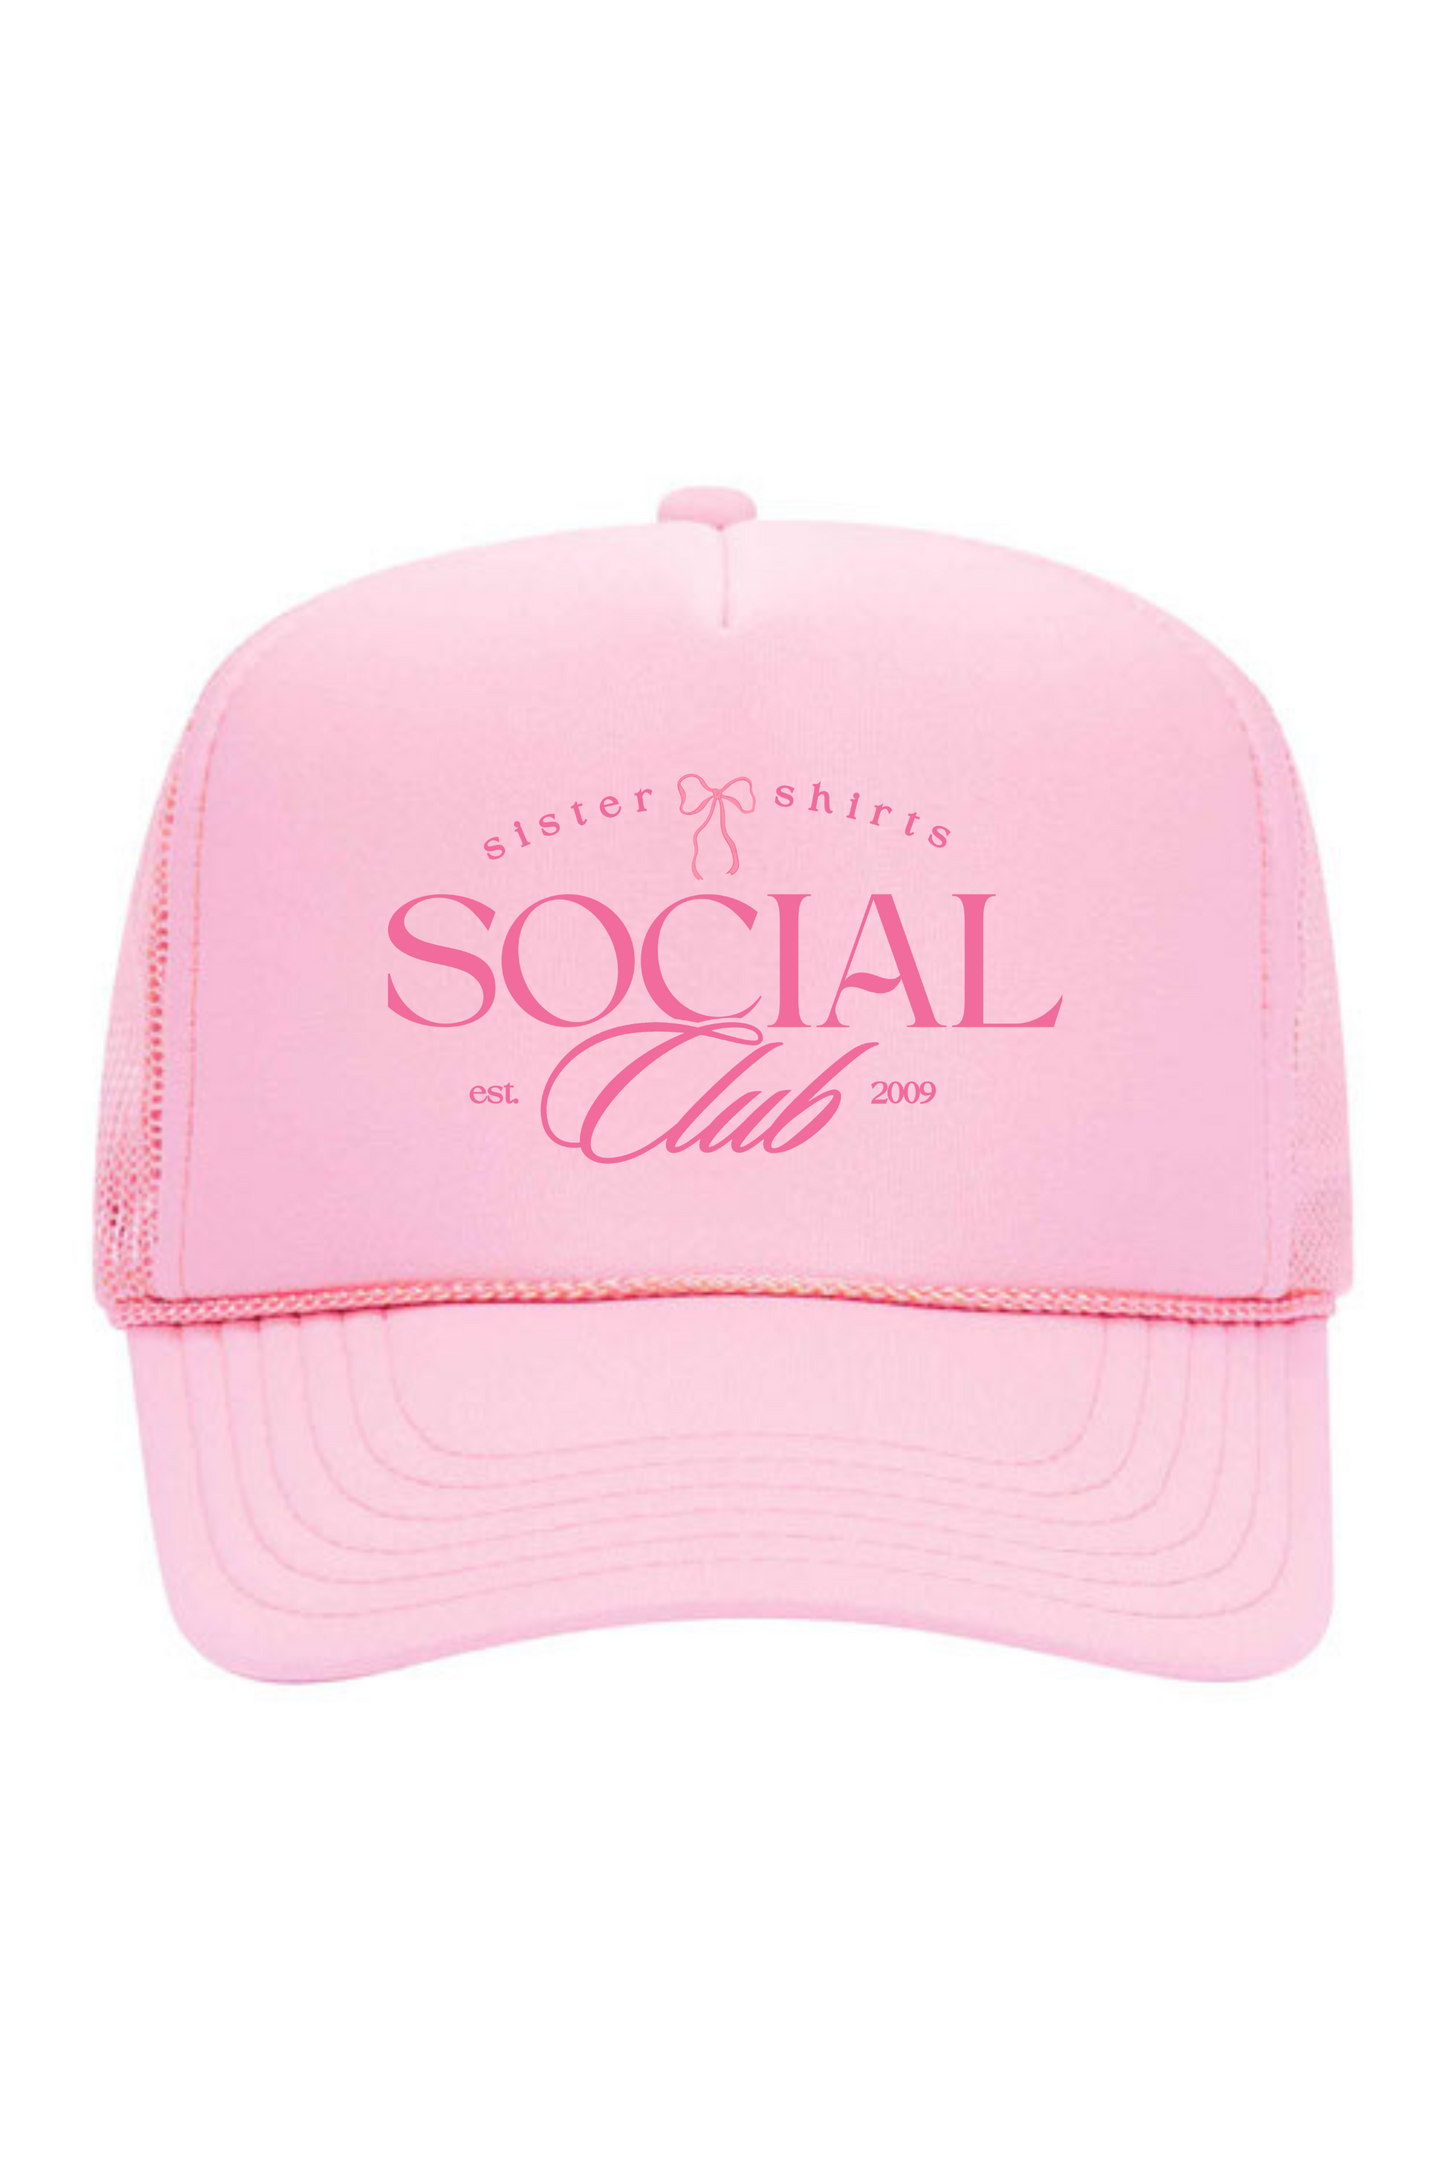 SS Social Club | Adult Trucker Hat-Hats-Sister Shirts-Sister Shirts, Cute & Custom Tees for Mama & Littles in Trussville, Alabama.